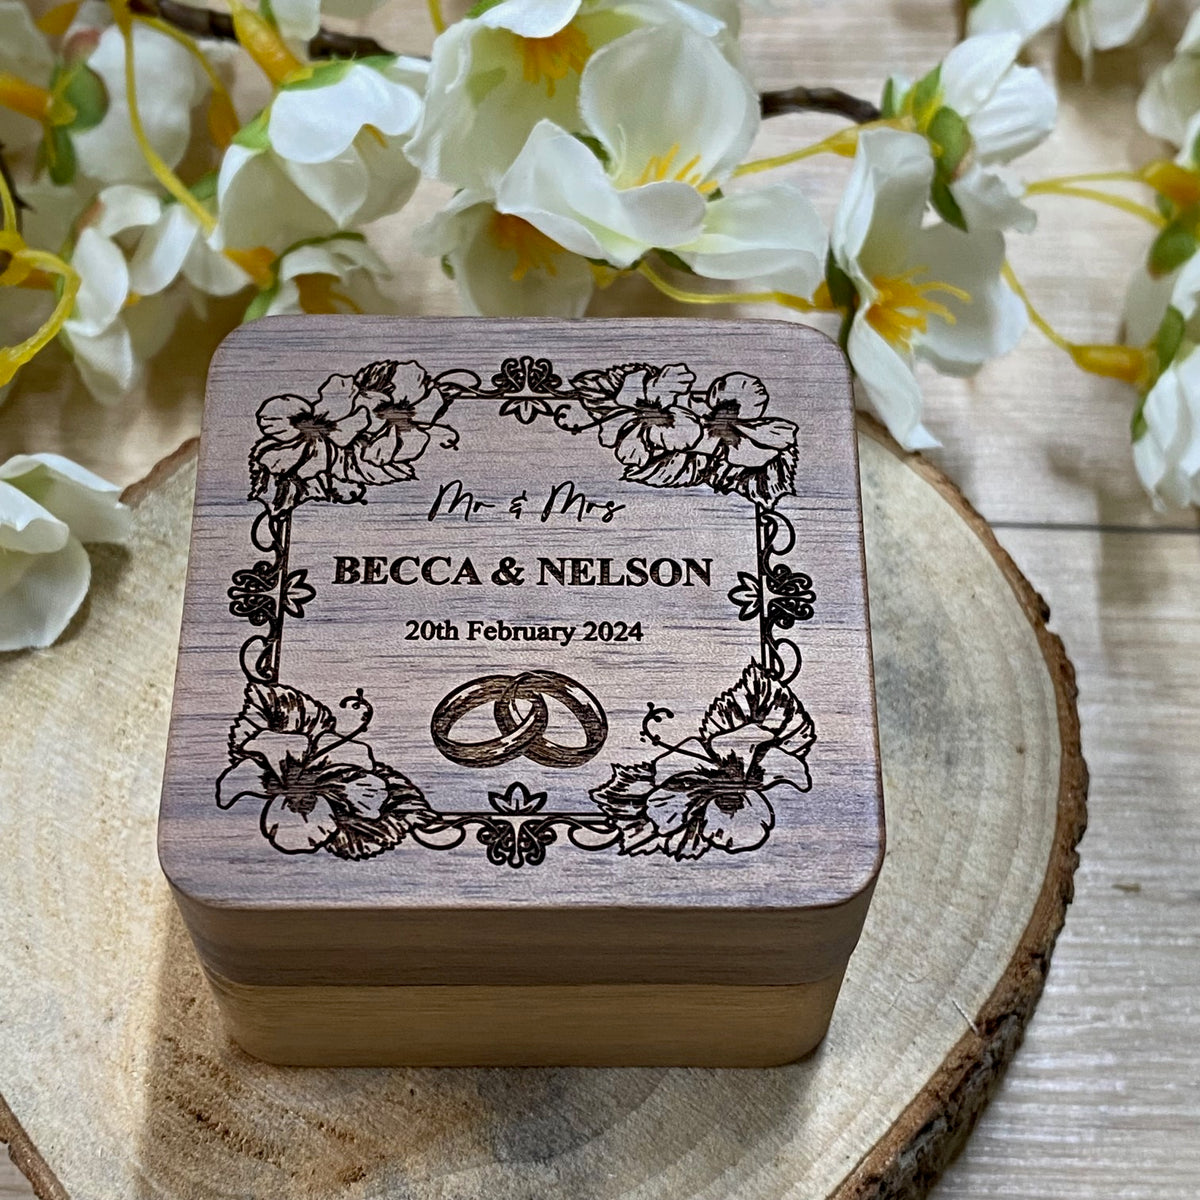 Personalised Wedding Ring Box Holder for 2 Rings With Flowers